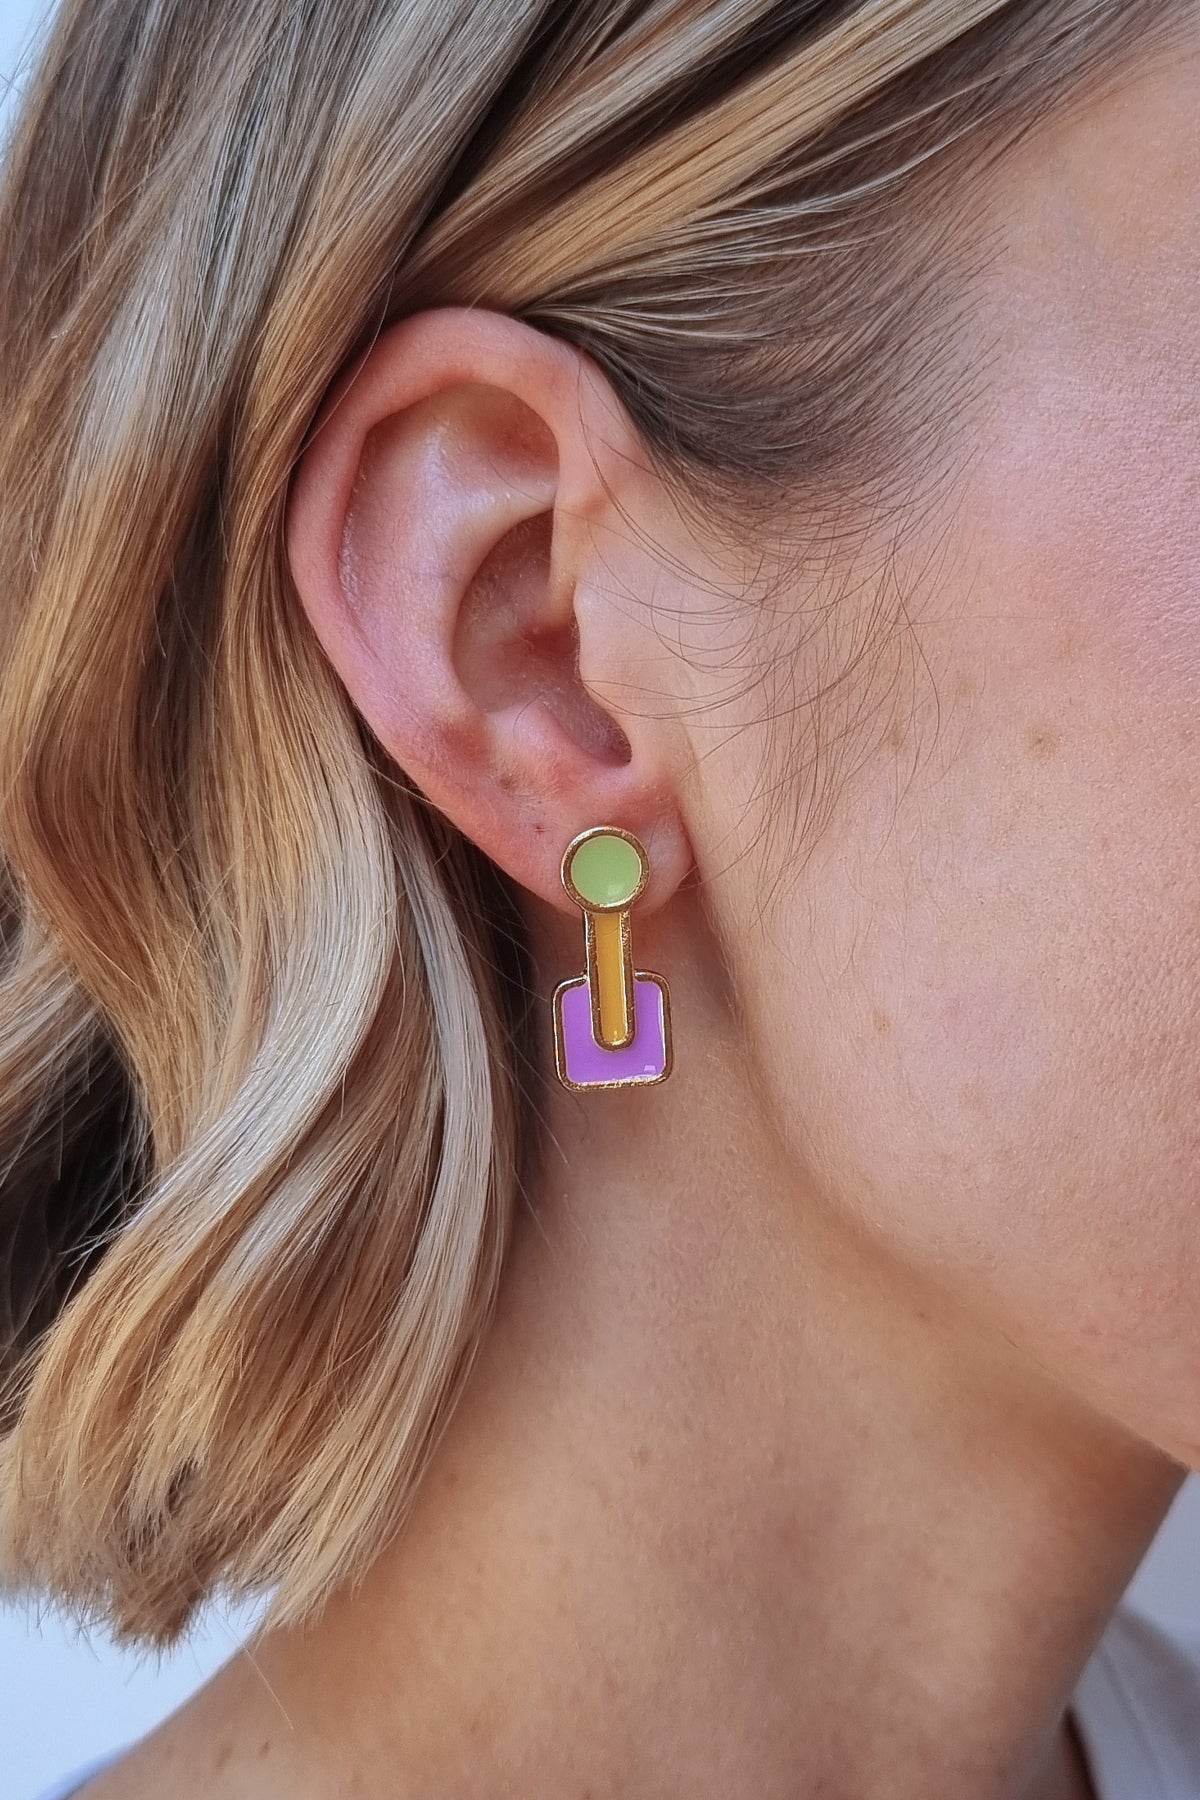 A blonde lady wears the Joystick studs in violet. They feature a green circle up top, a chartreuse drop which ends in the centre of a violet rounded square shape. The shapes are all outlined in gold.